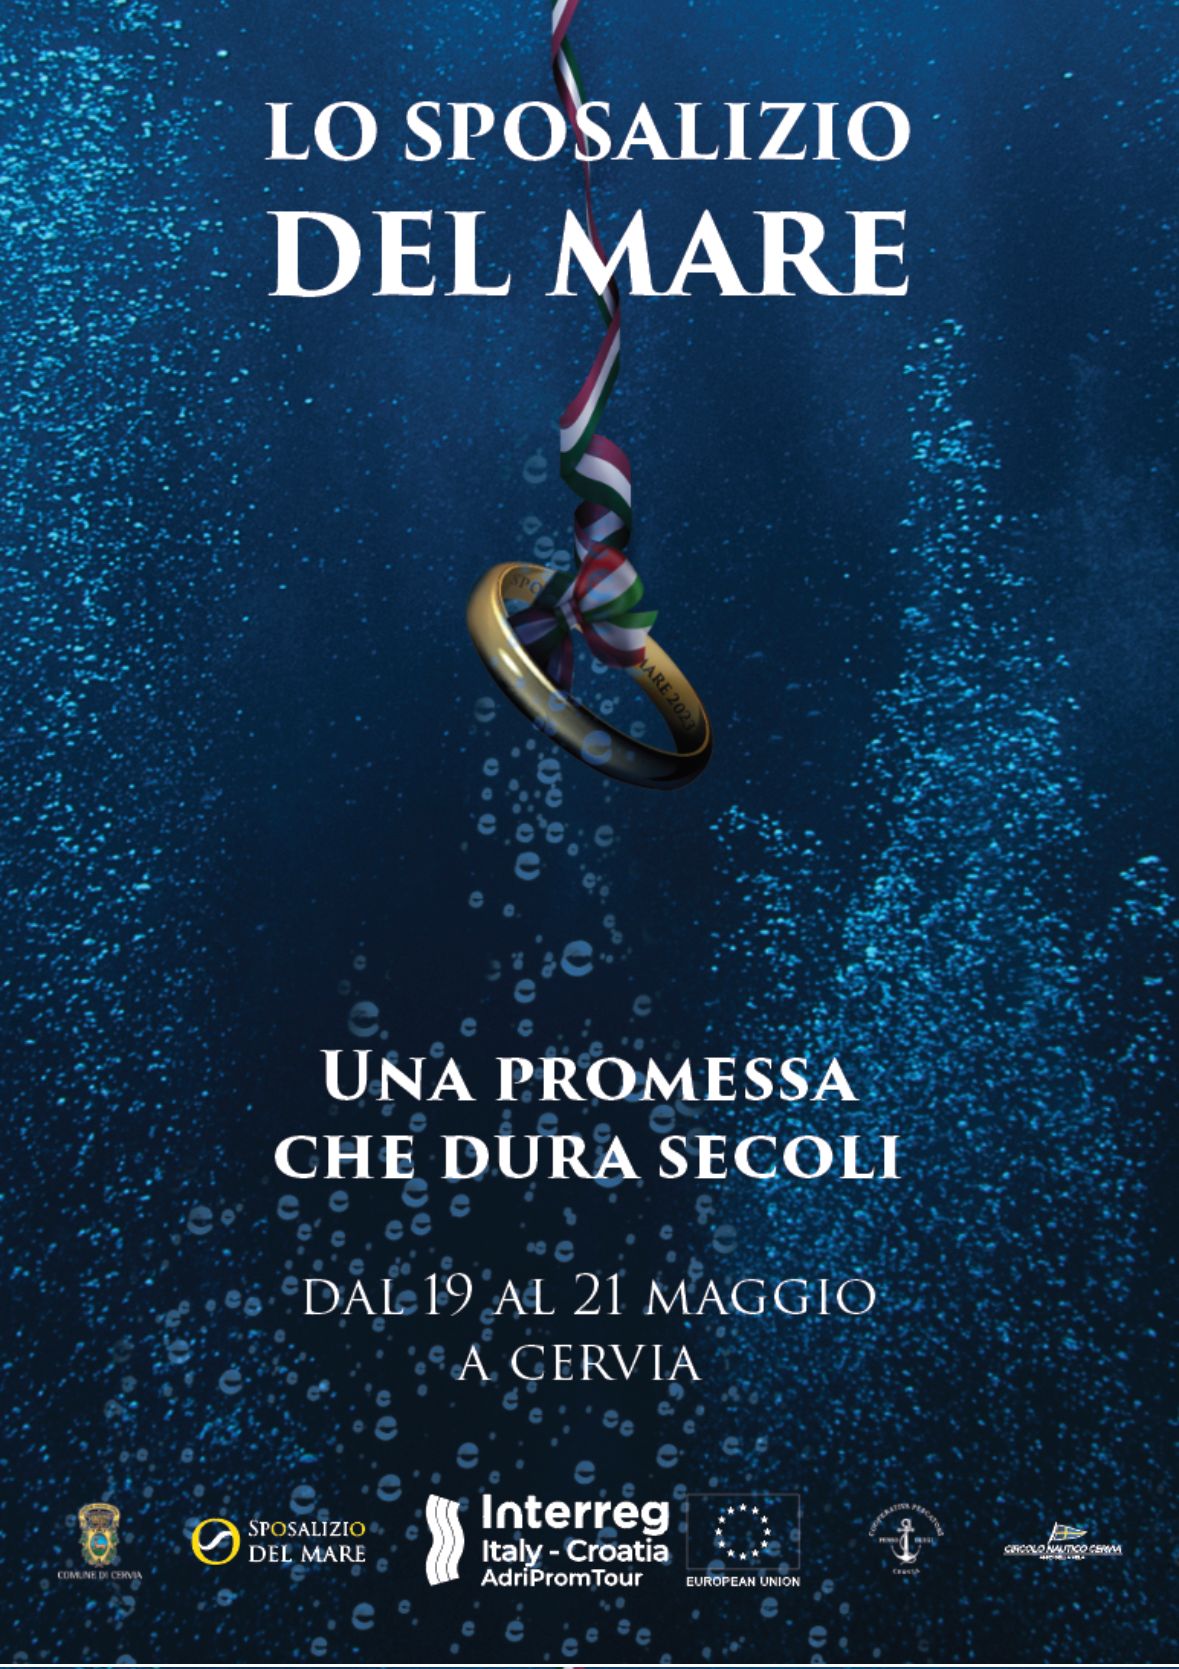 The Marriage of the Sea event in Cervia